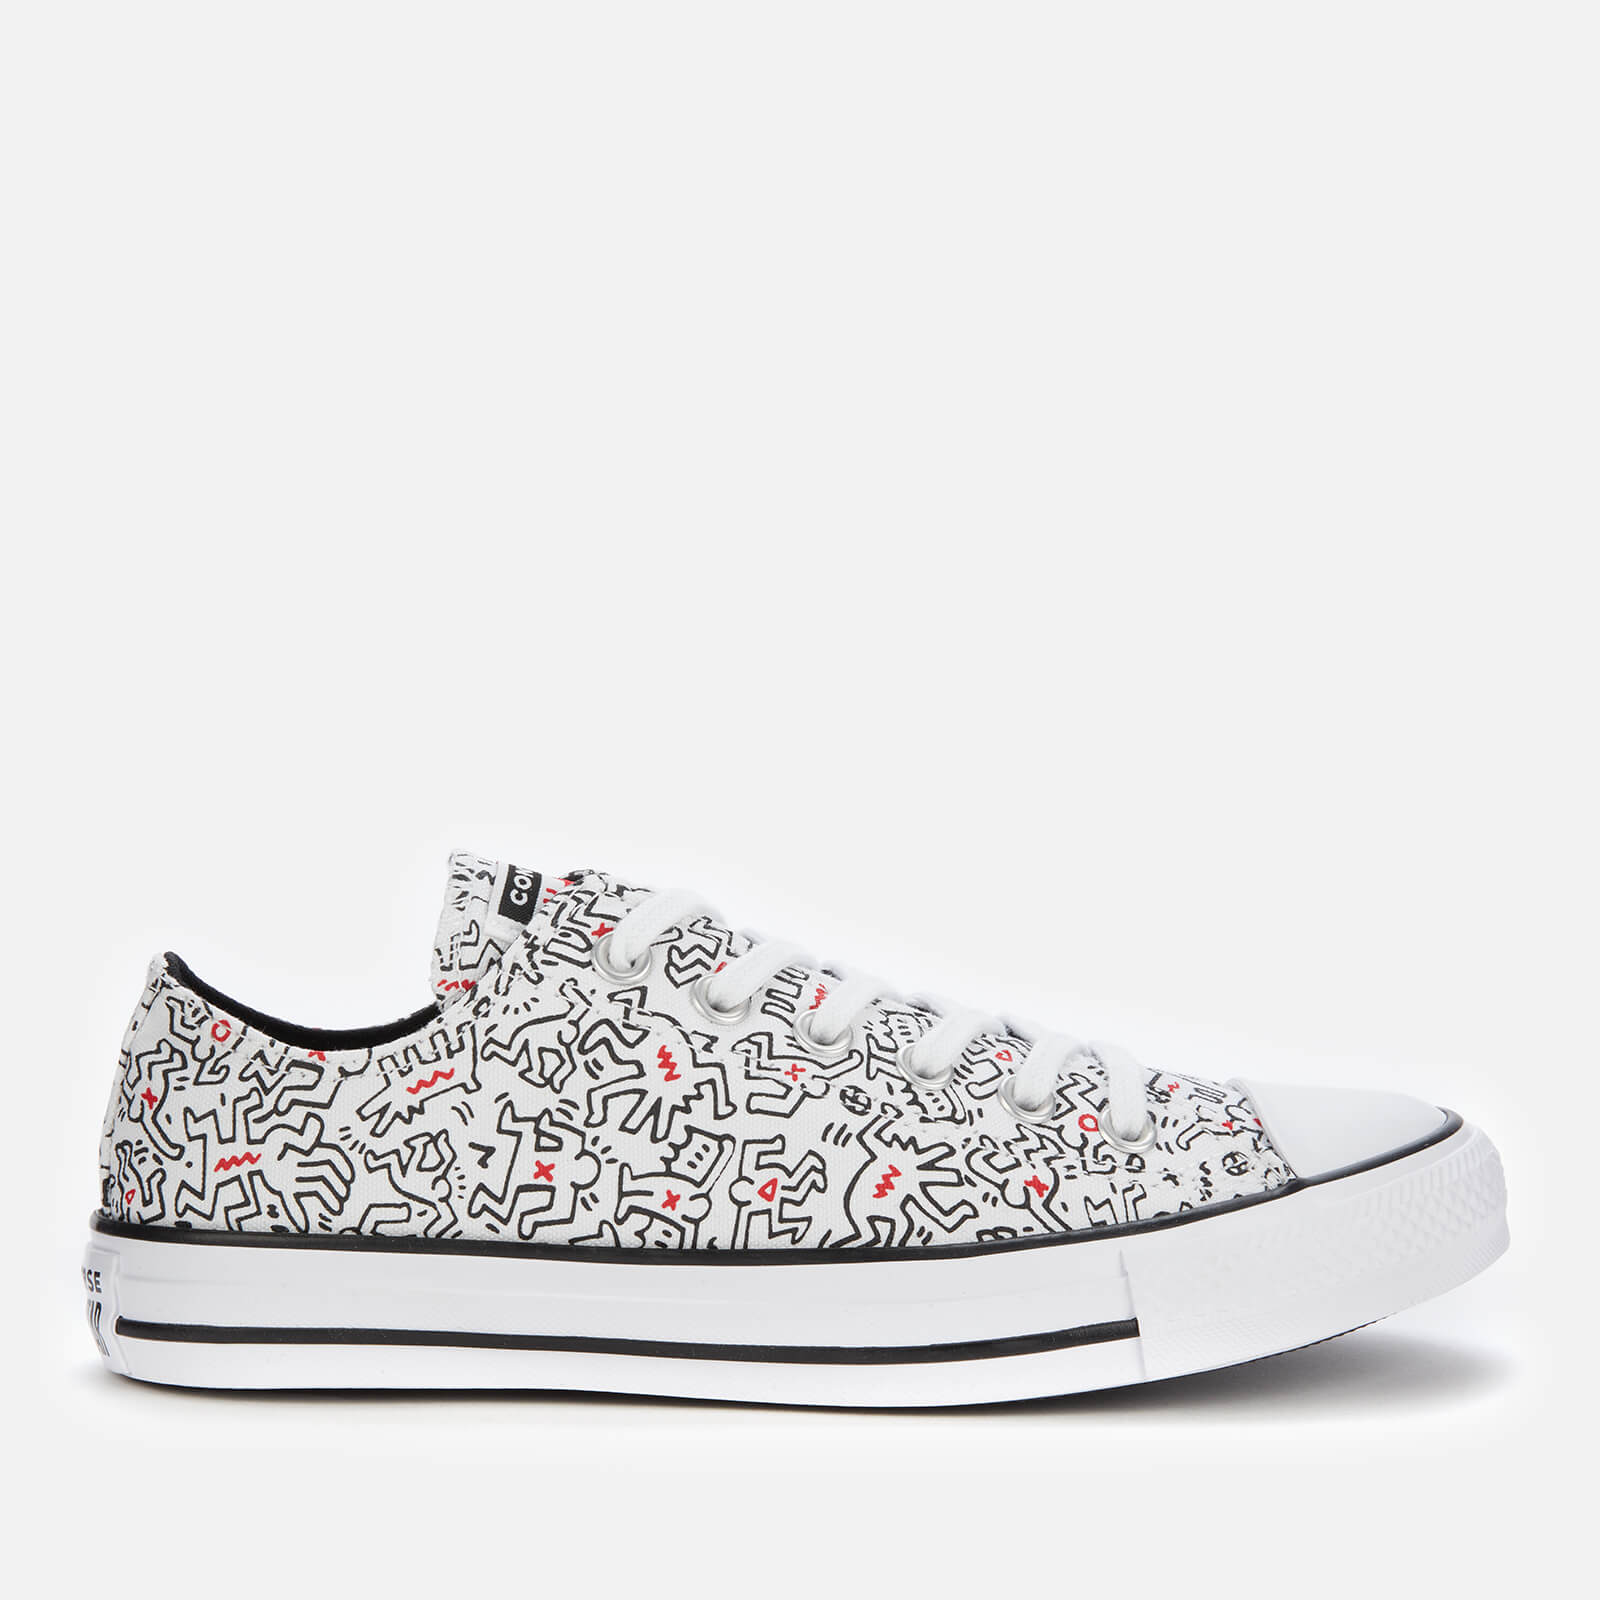 Converse Keith Haring Chuck Taylor All Star Ox Trainers - White/Black/Red - UK 7